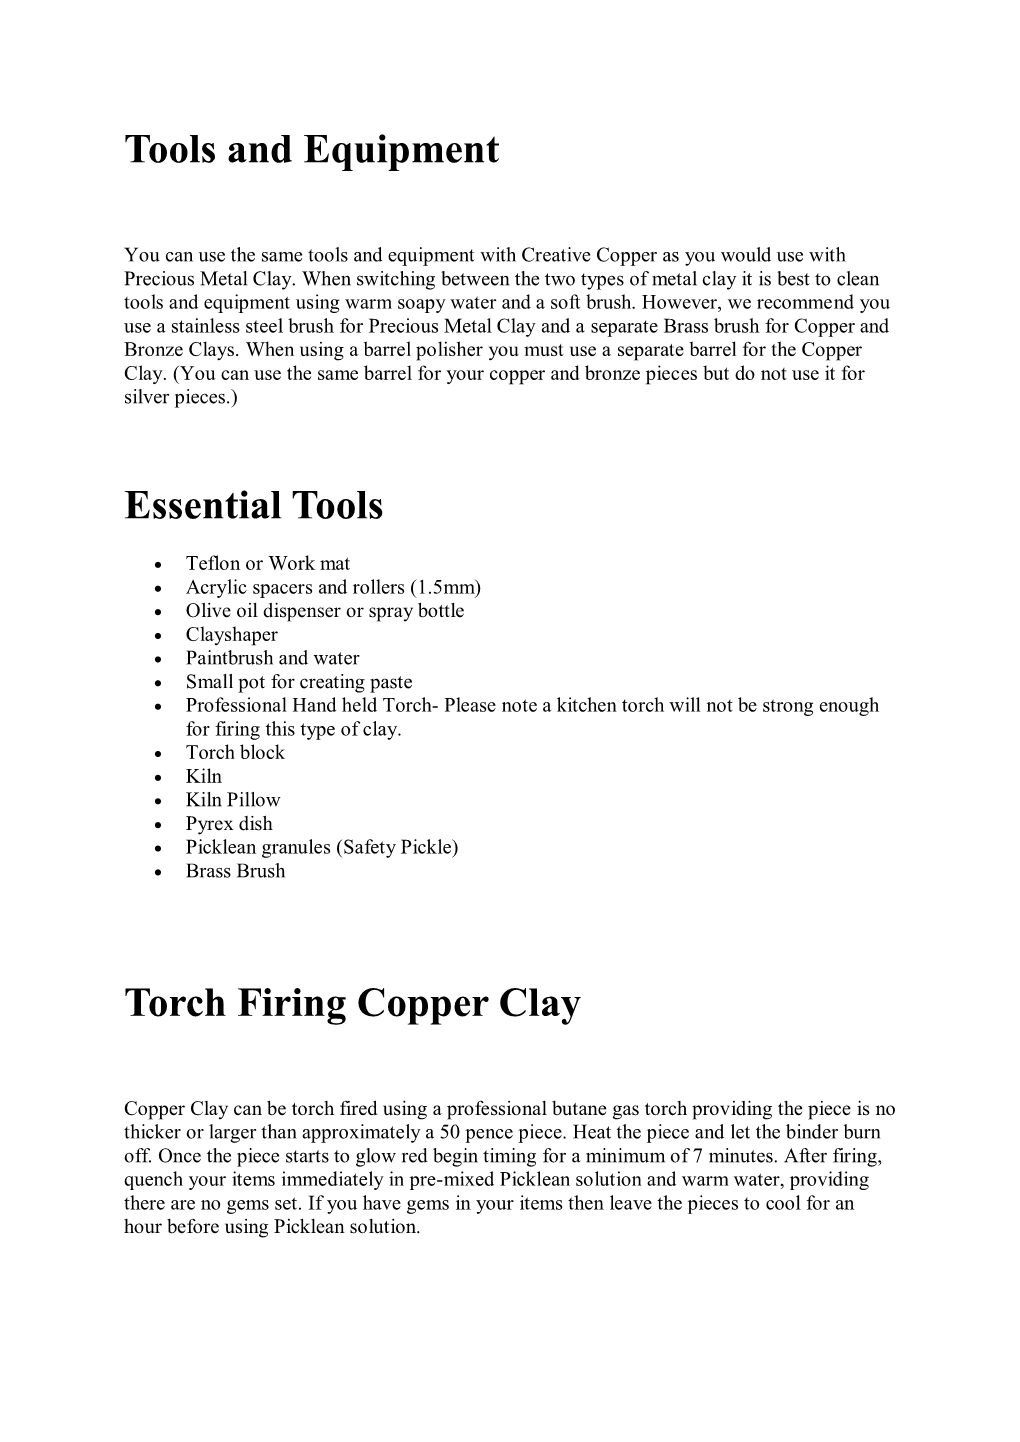 Tools and Equipment Essential Tools Torch Firing Copper Clay